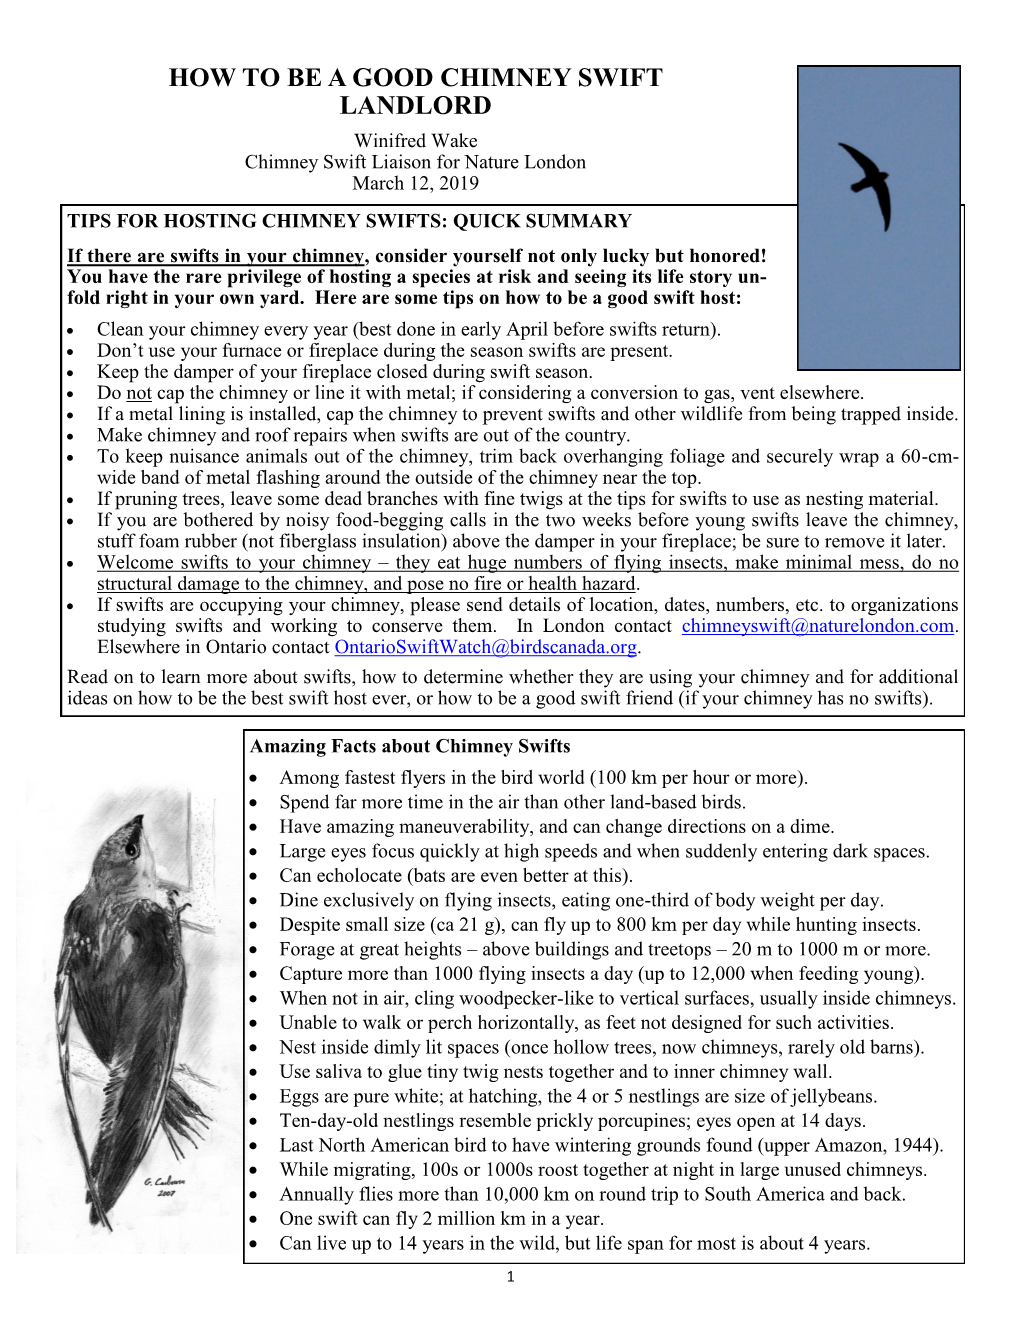 How to Be a Good Chimney Swift Landlord